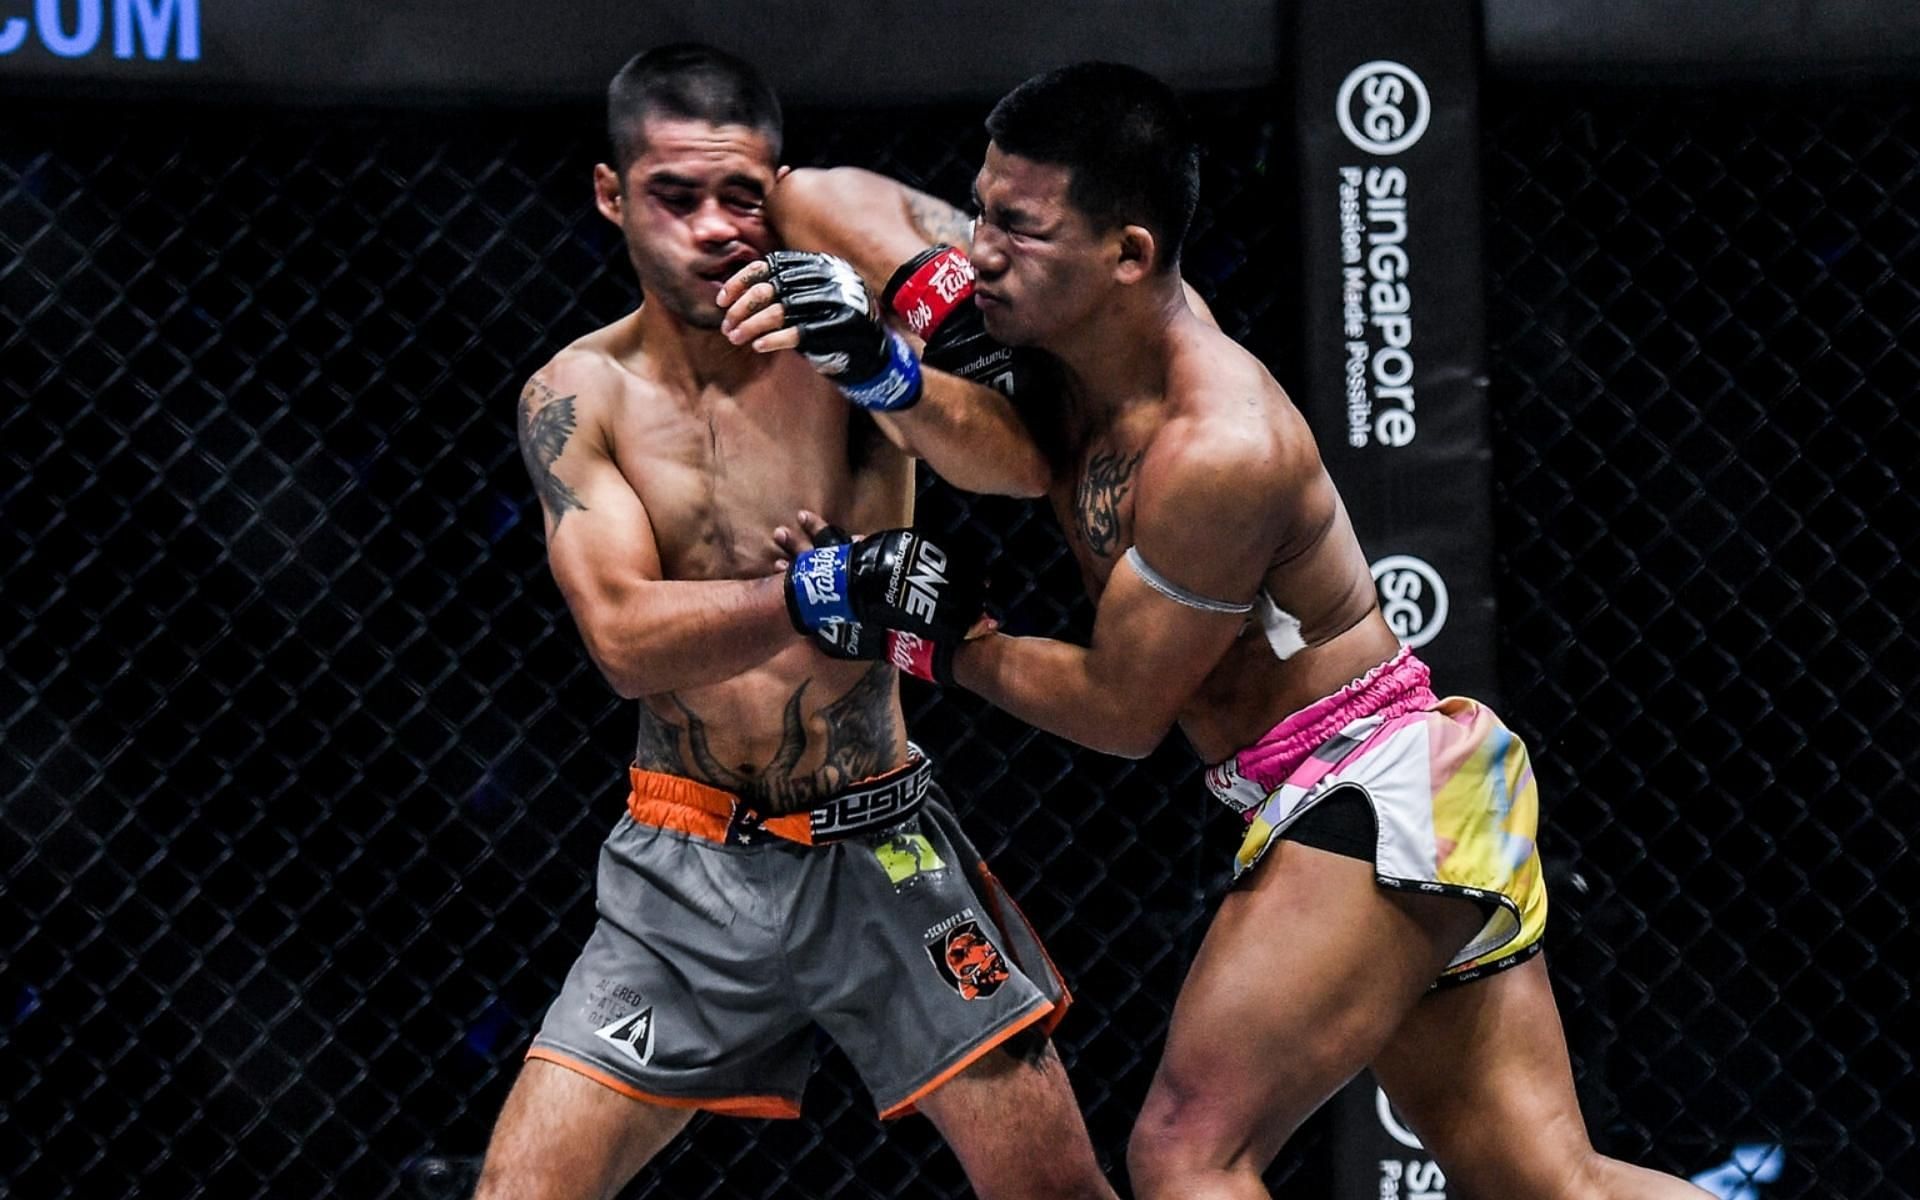 The war between Danial Williams (left) and Rodtang Jitmuangnon (right) was one for the ages. (Image courtesy of ONE Championship)